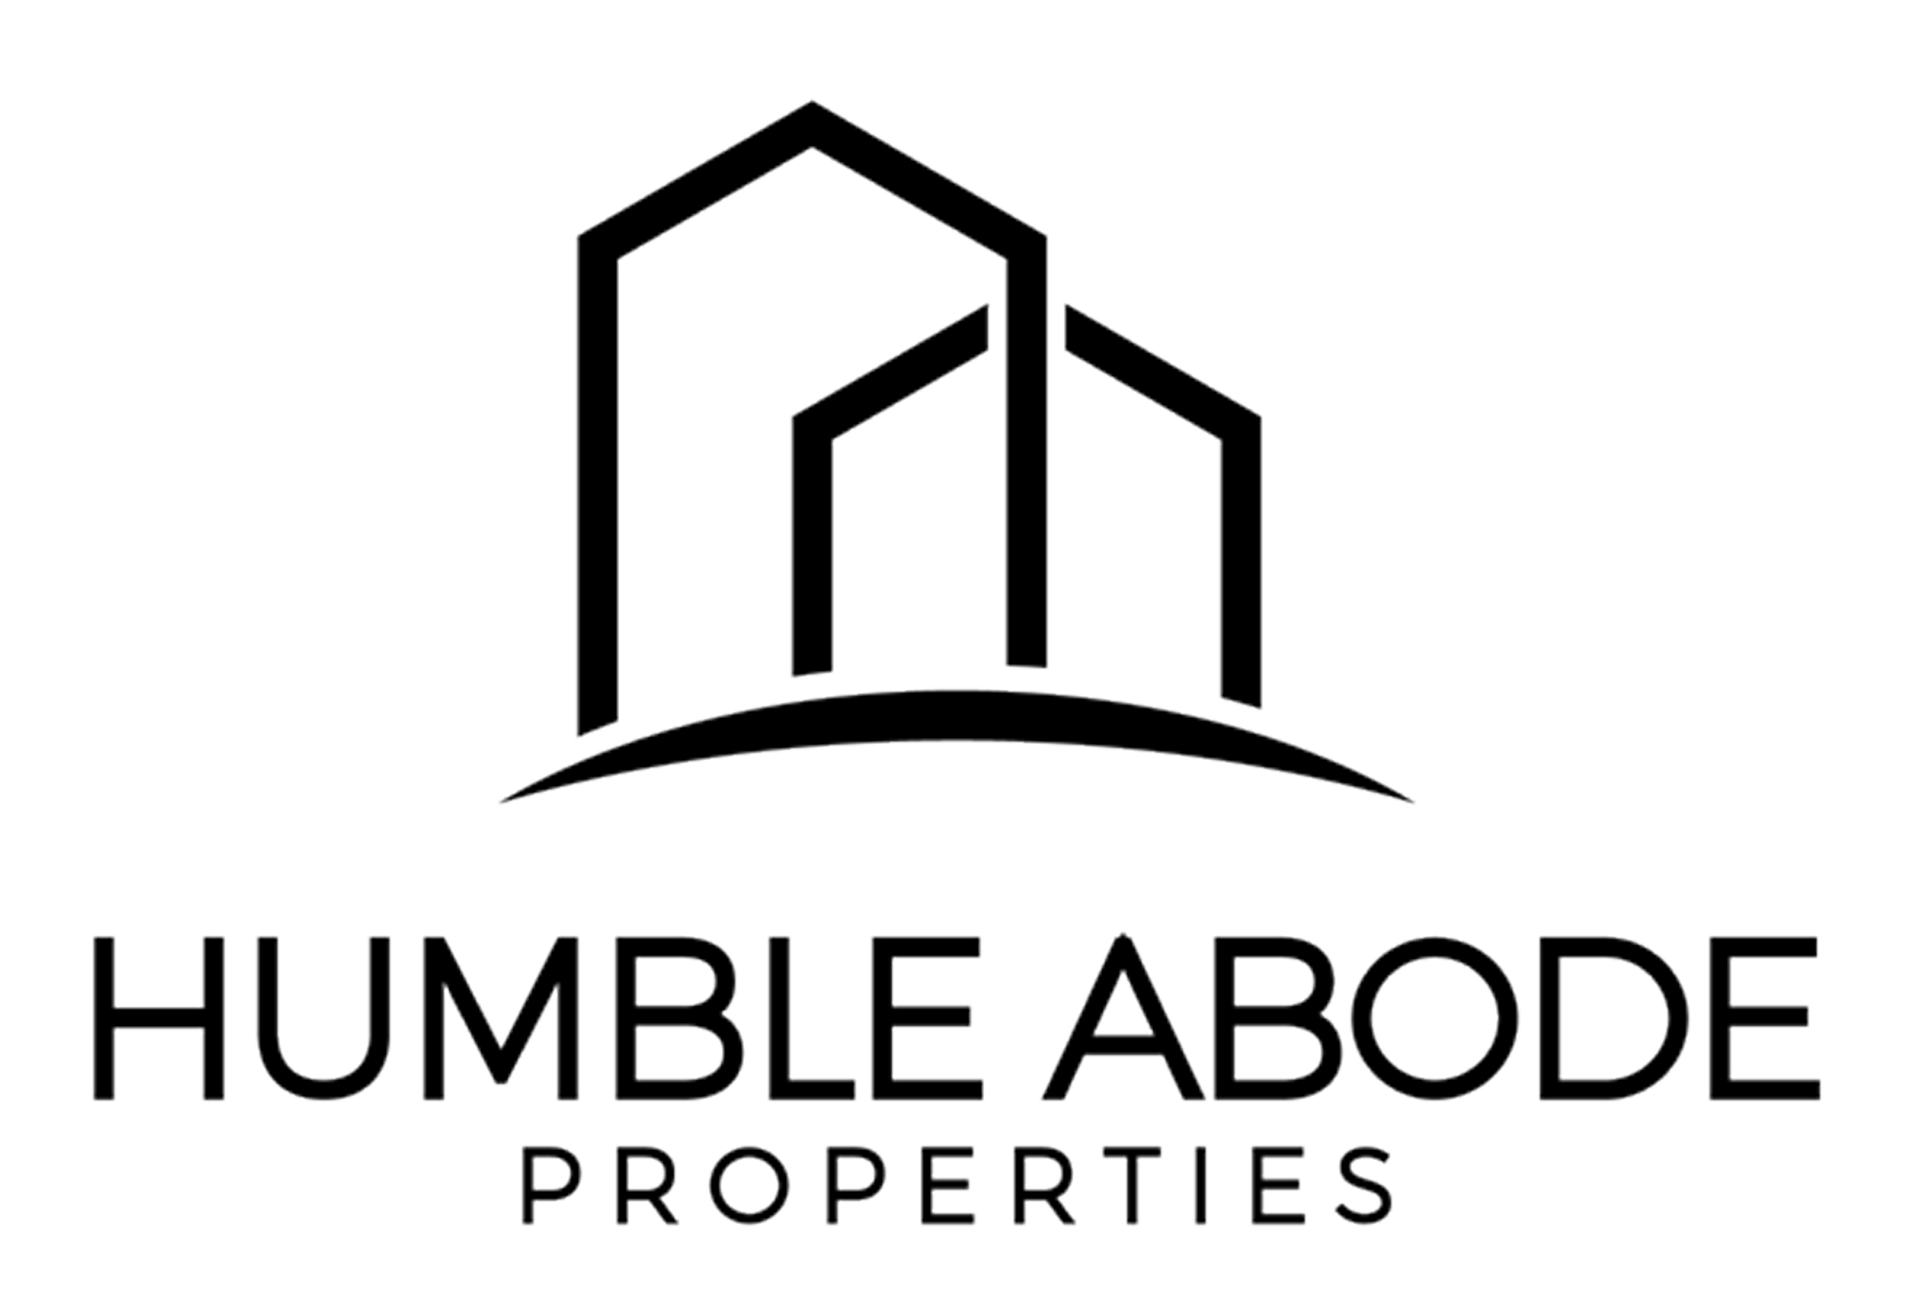 Humble Abode Properties company logo - click to go to home page